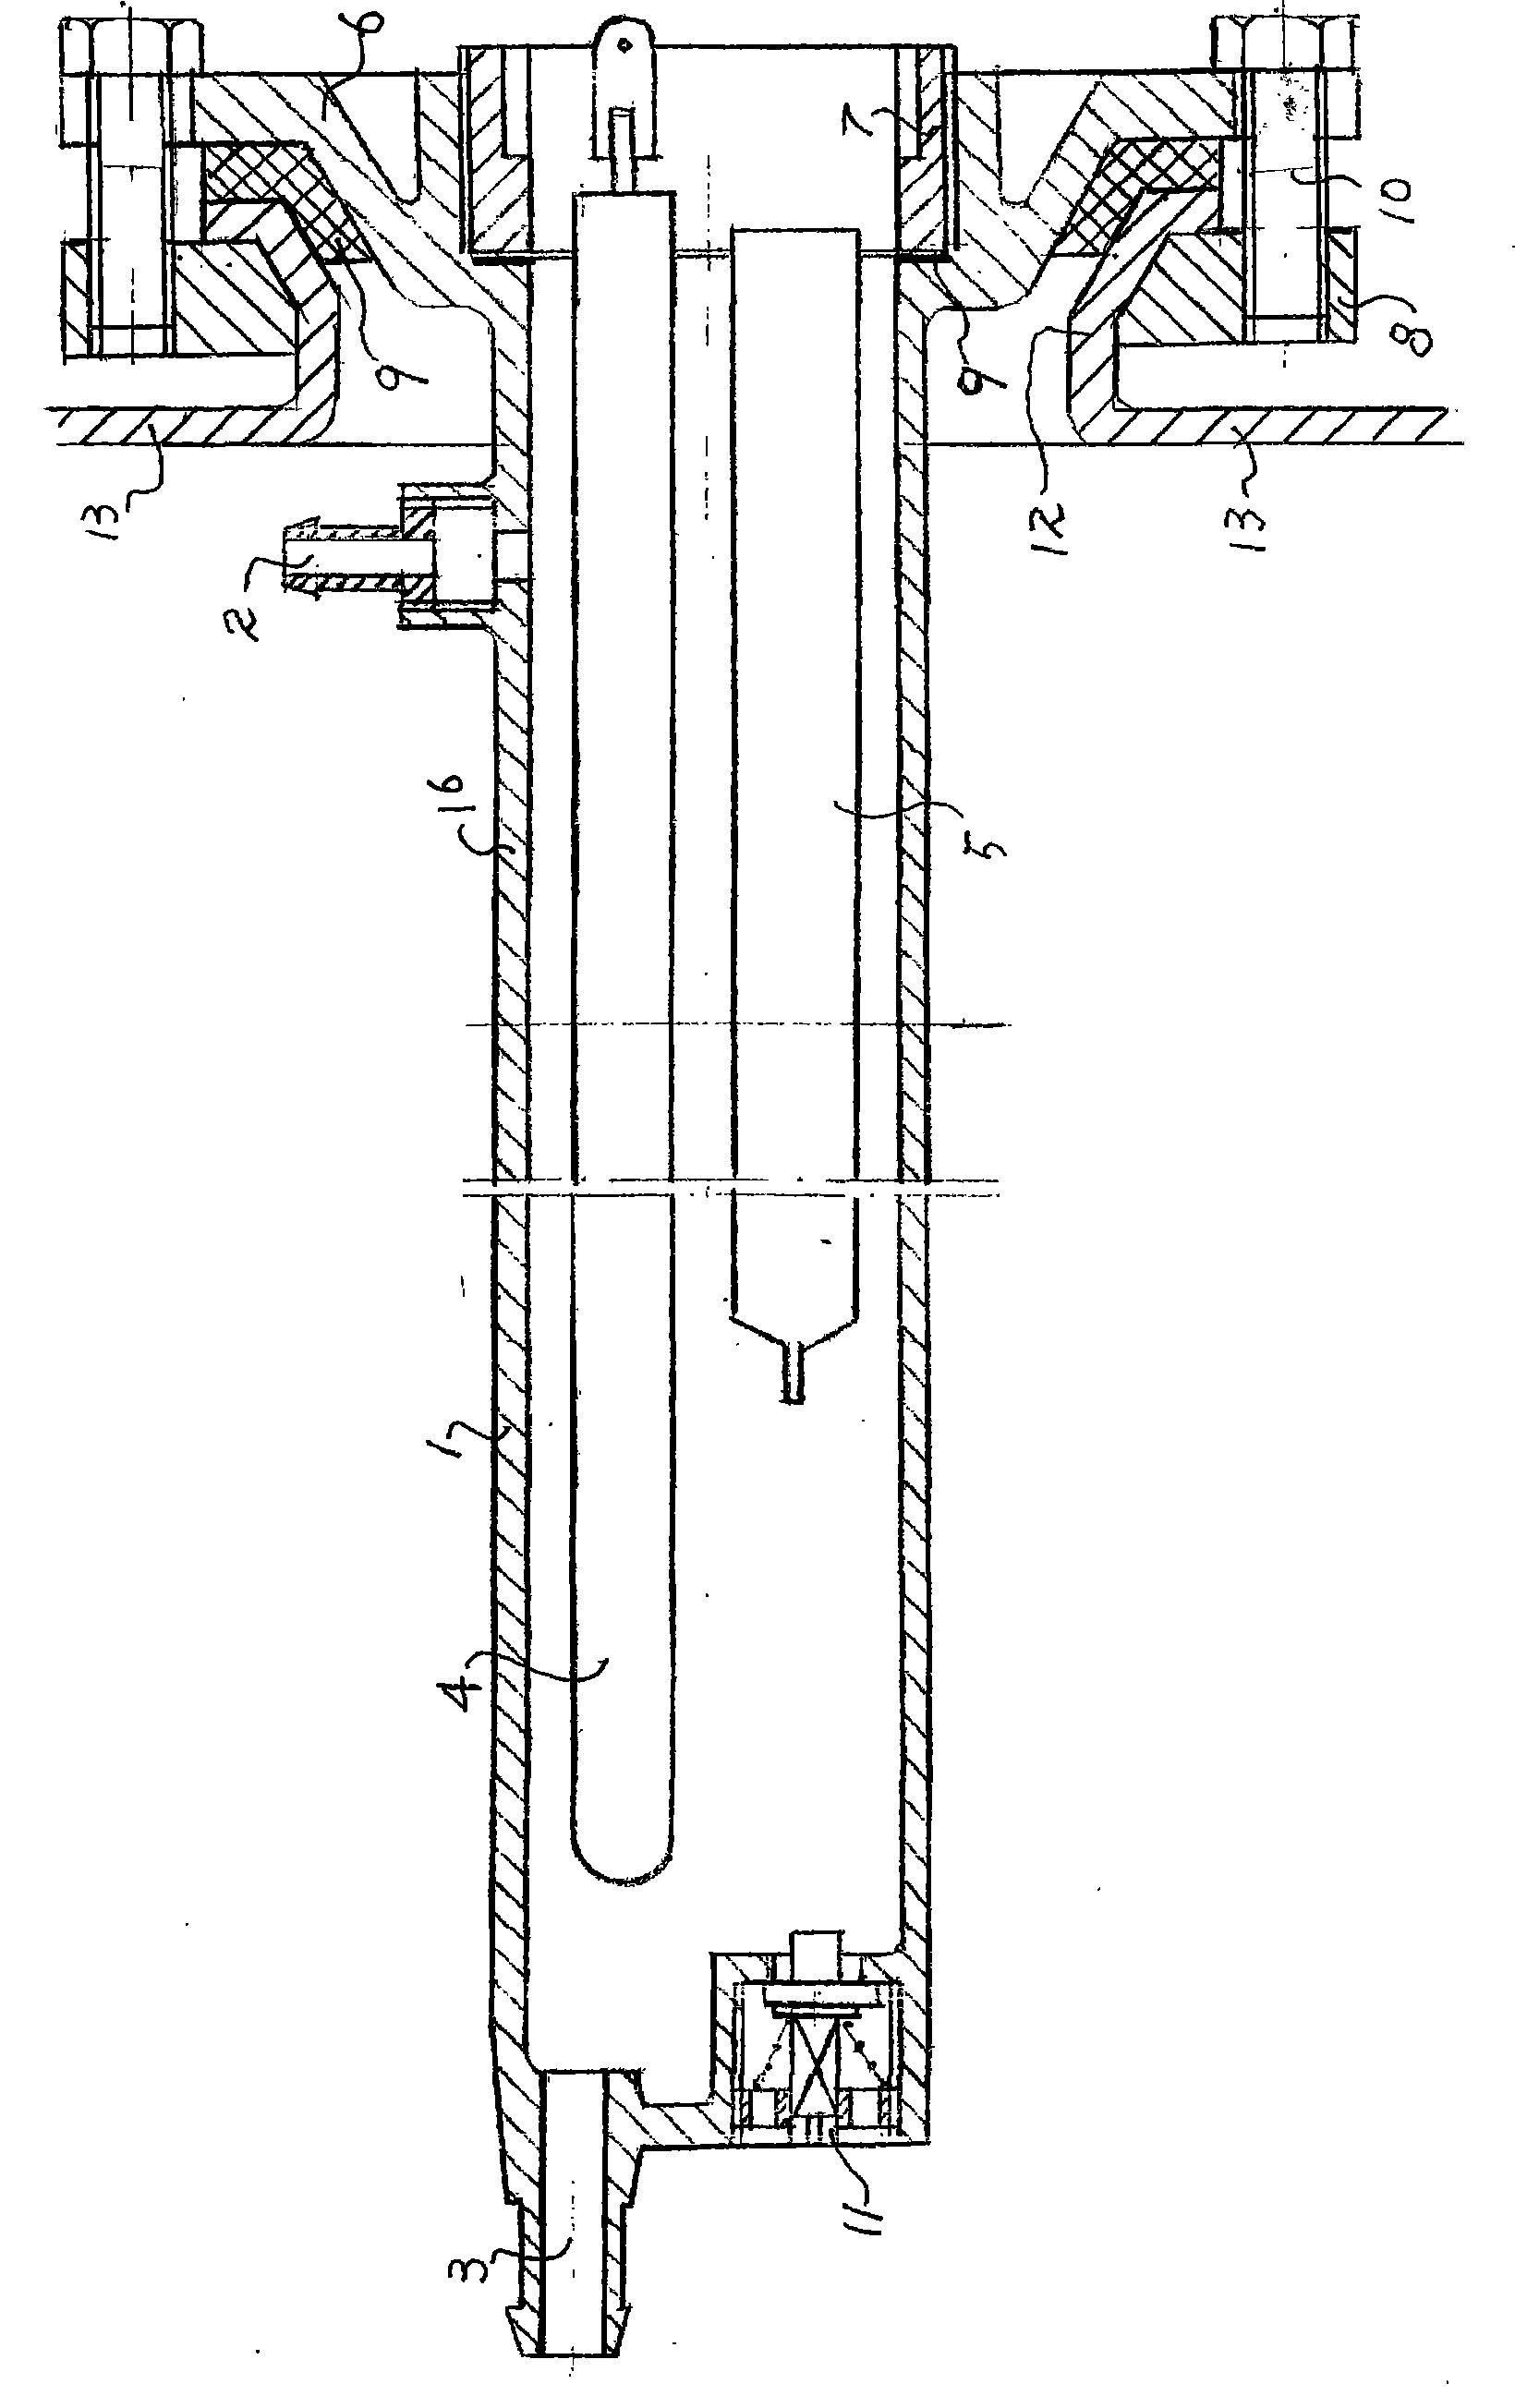 Heating device for water storage type water heater